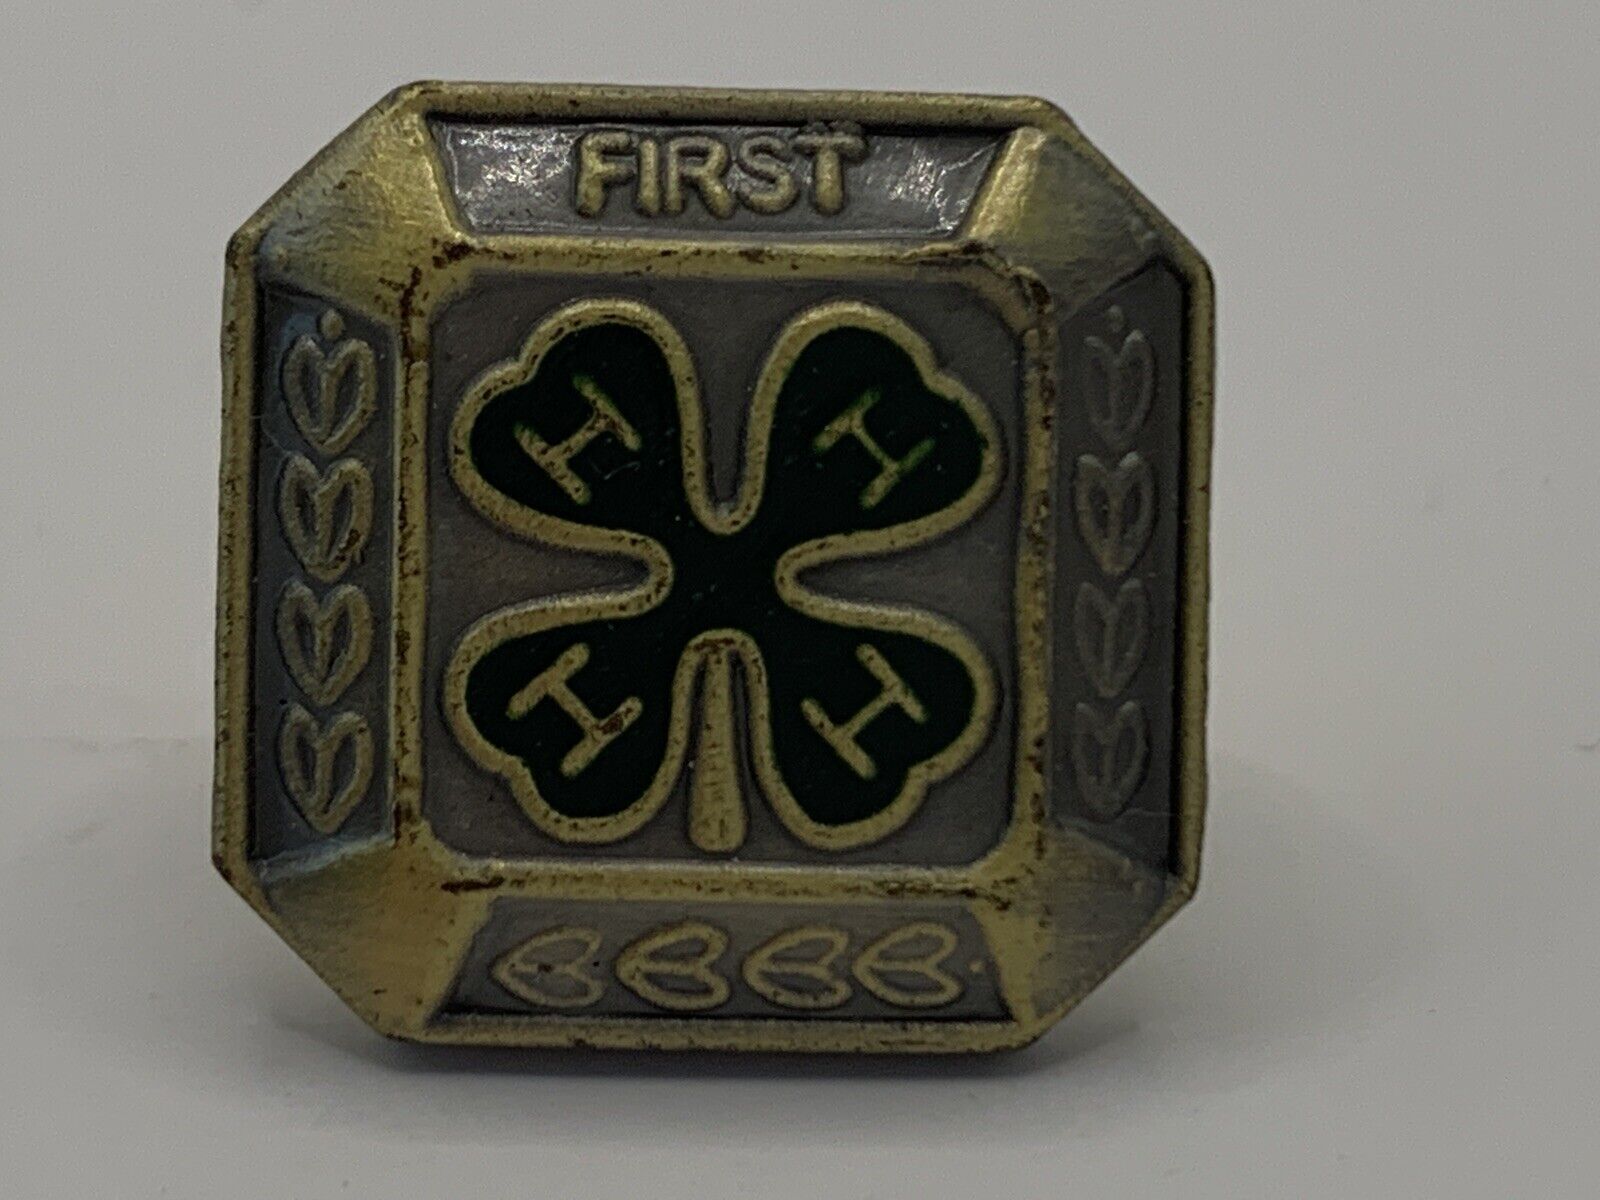 Vintage 4H First Place Award Pin